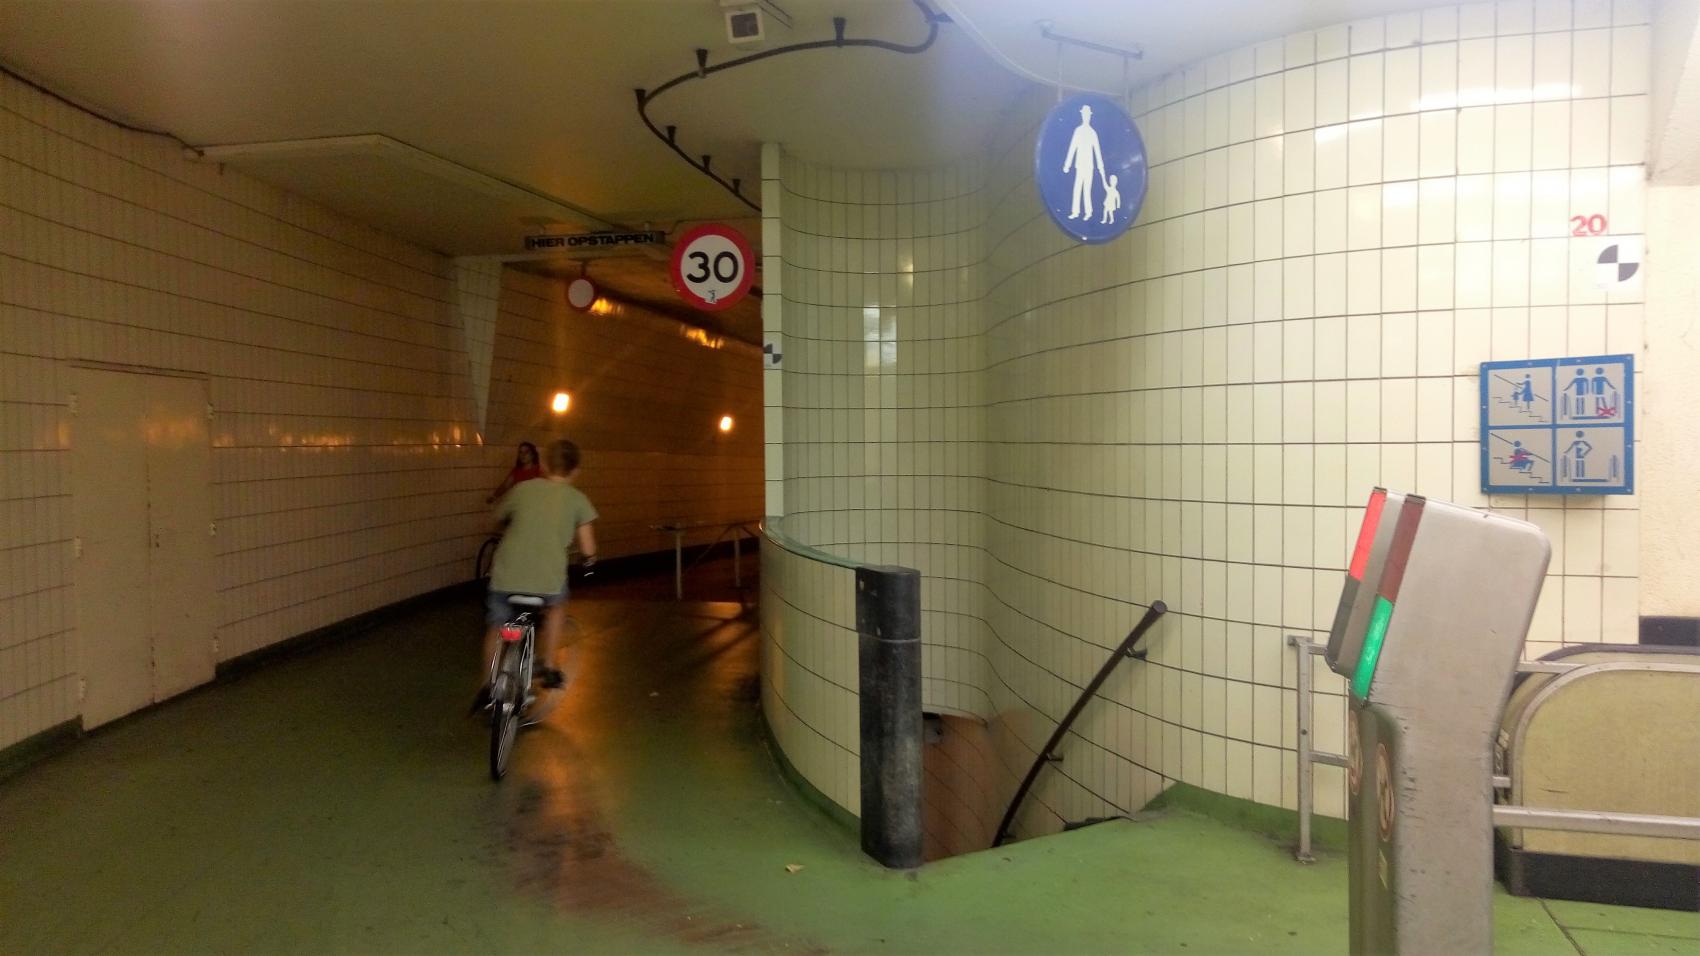 Pedestrian tunnel is one level below the cycling path. Additional staircase connects both tunnels.